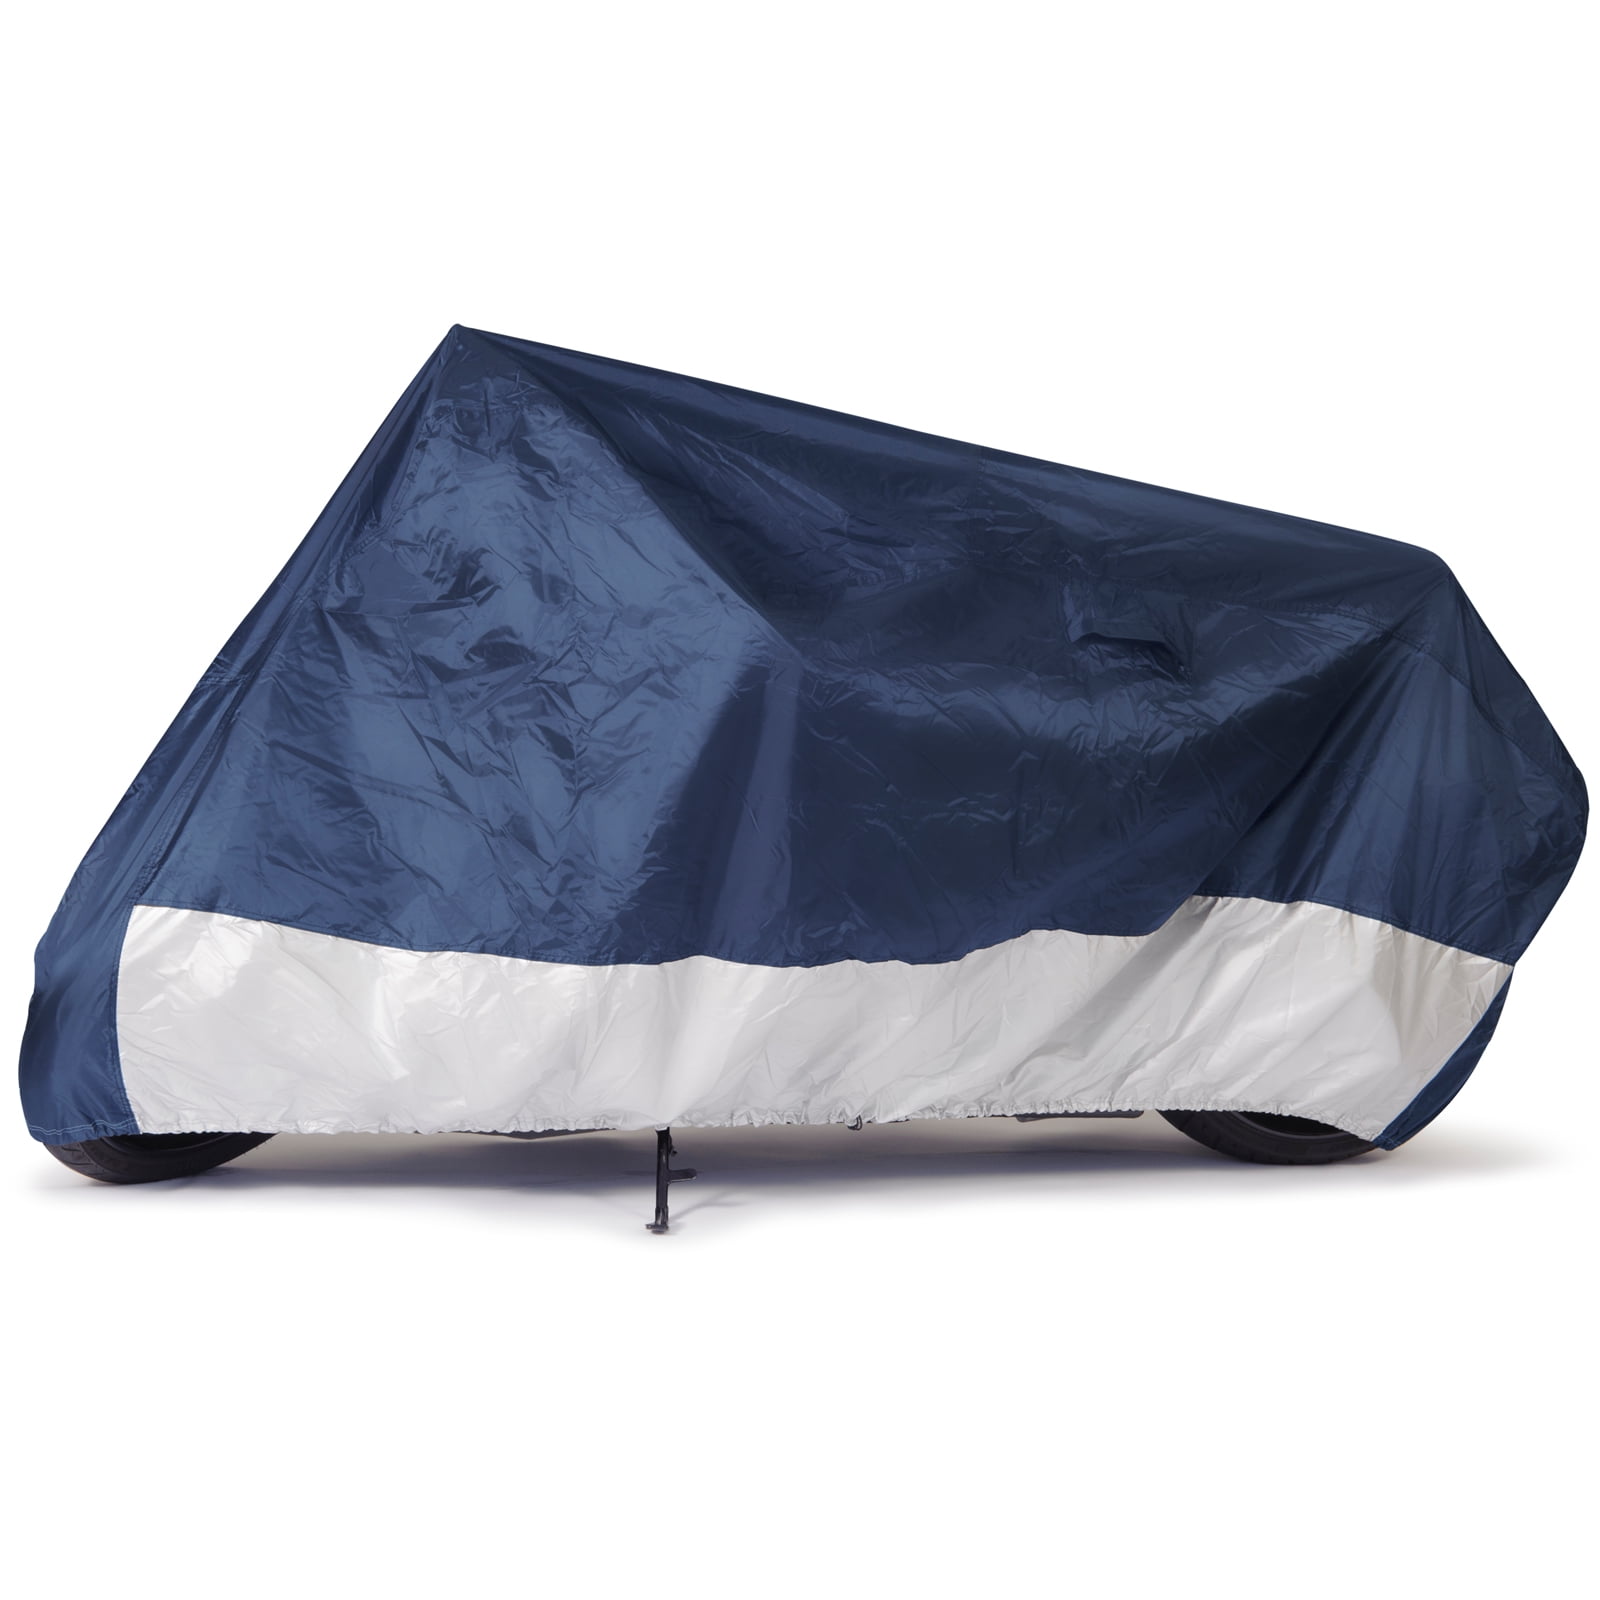 Budge Industries Standard Motorcycle Cover, Basic Protection for Motorcycles, Multiple Sizes